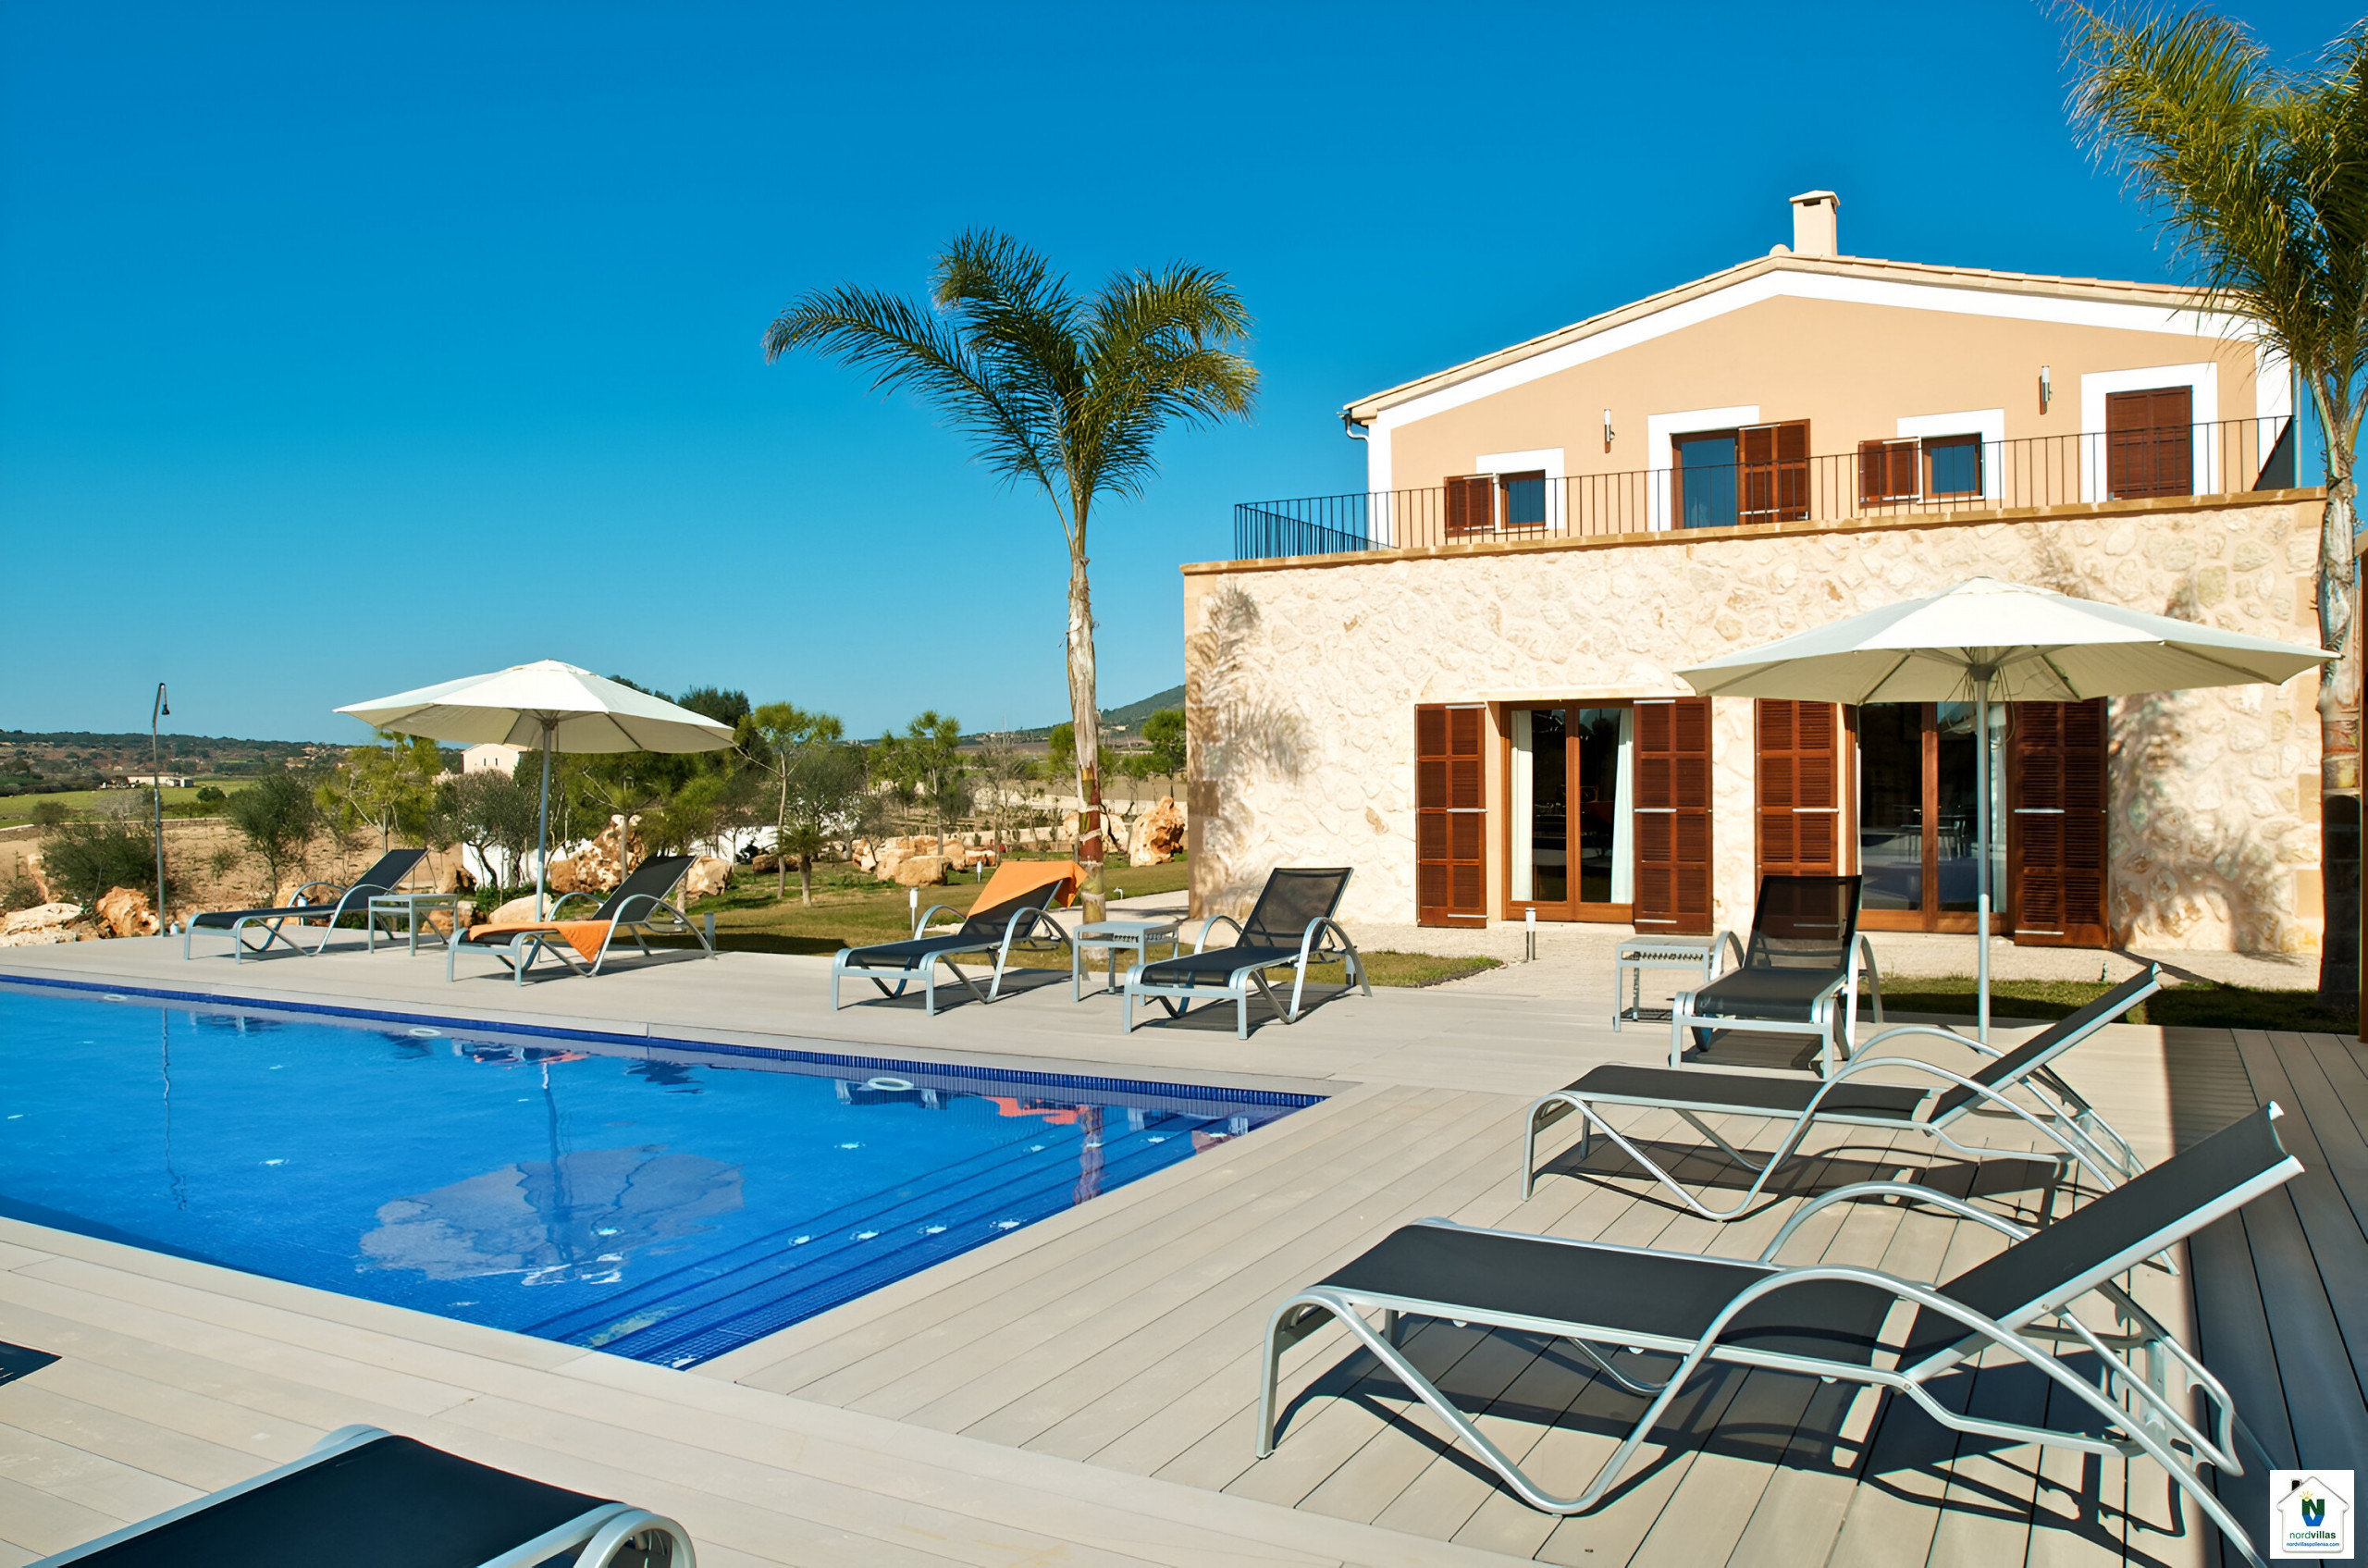 Luxury finca with swimming pool, spacious. Charming